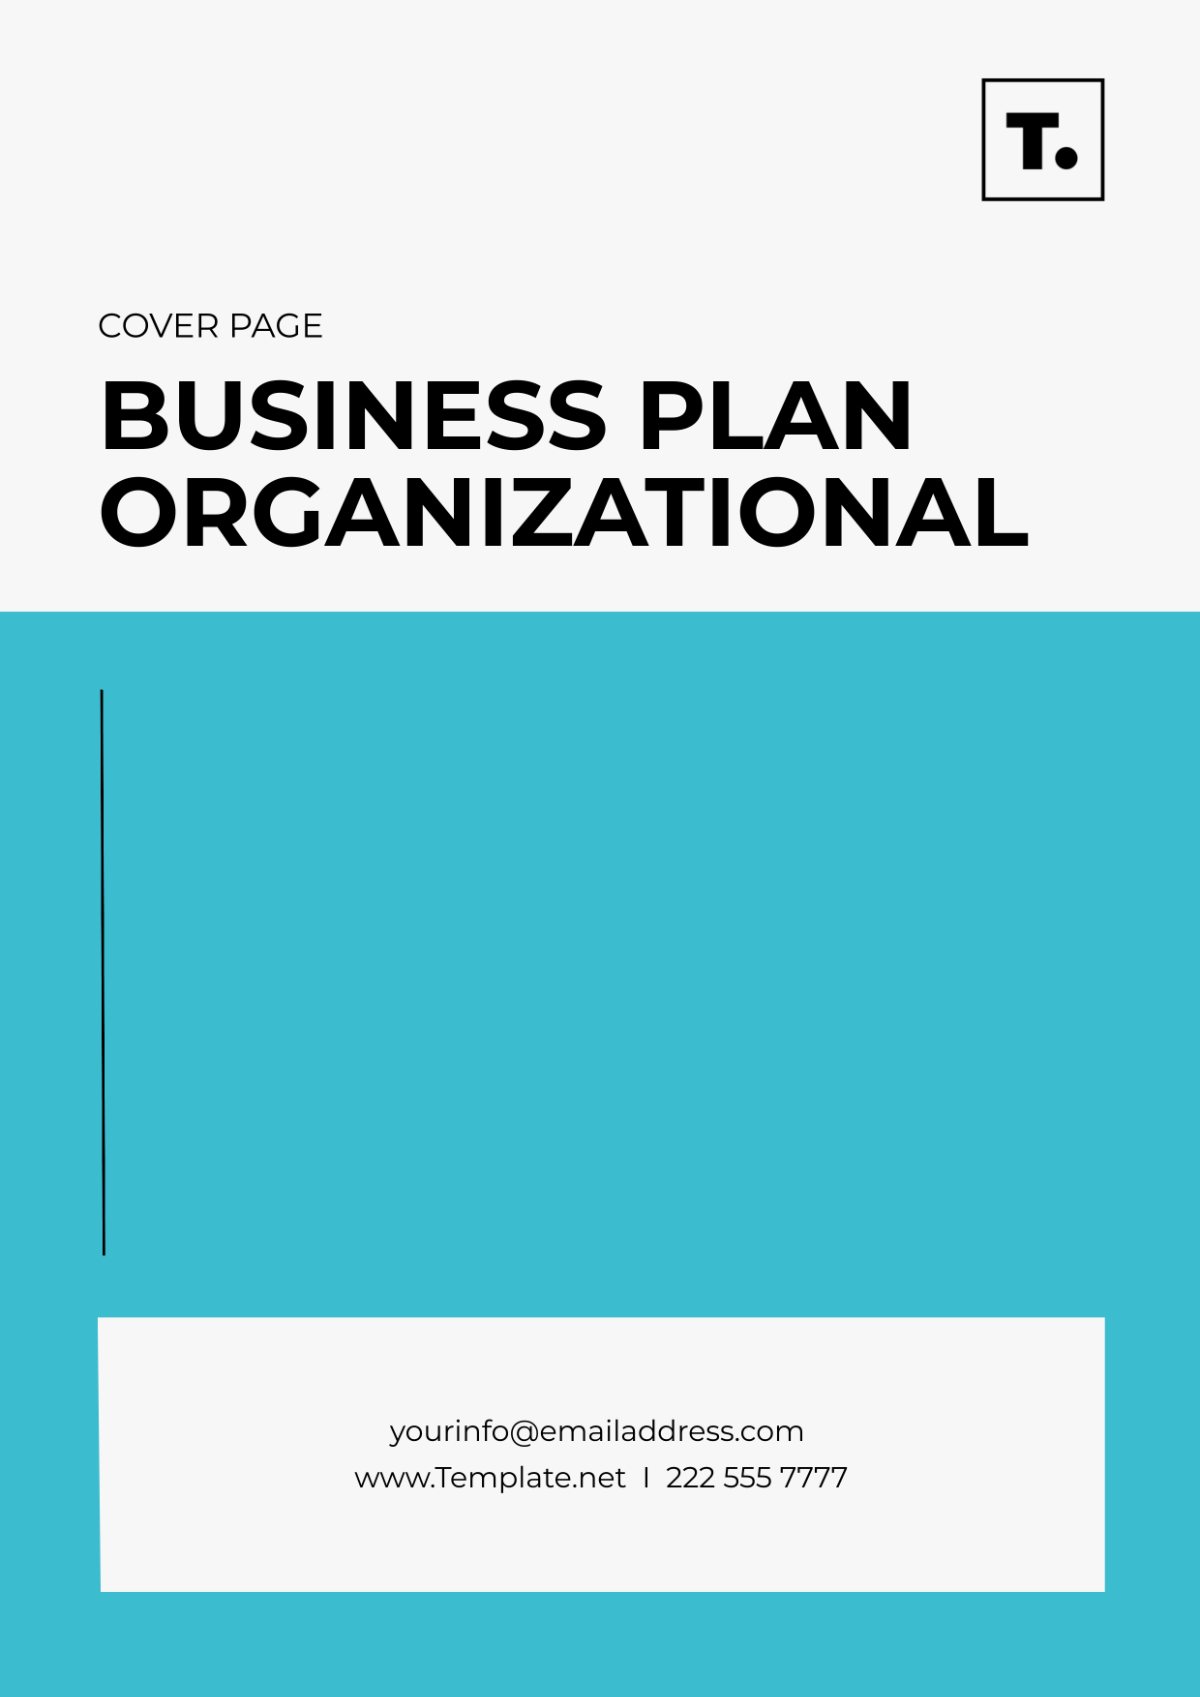 Business Plan Organizational Cover Page Template